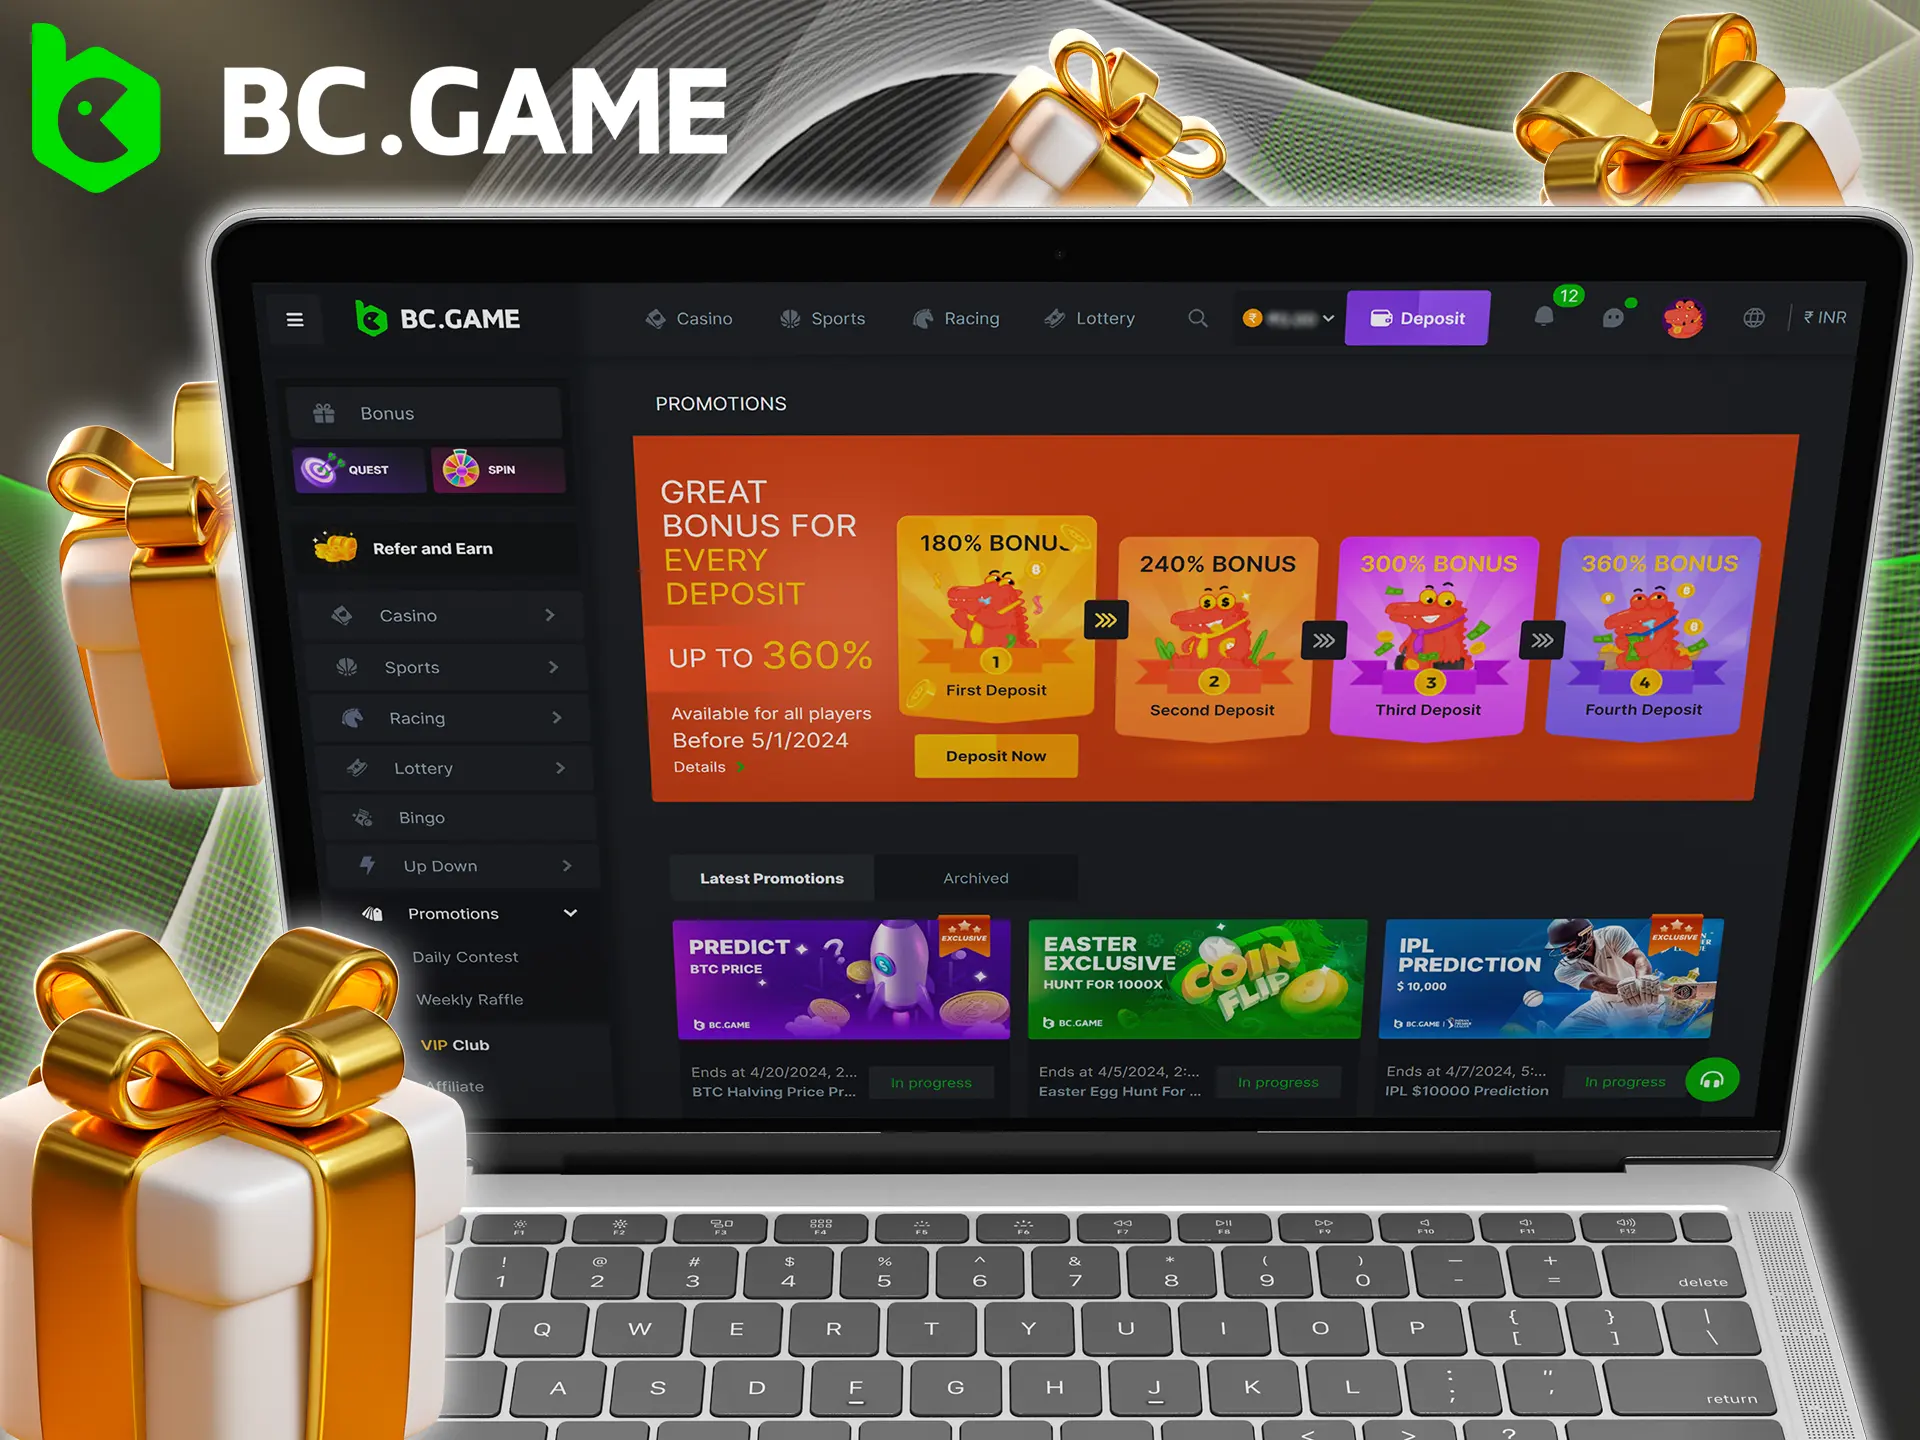 Find out more information about wagering bonuses at BC Game.